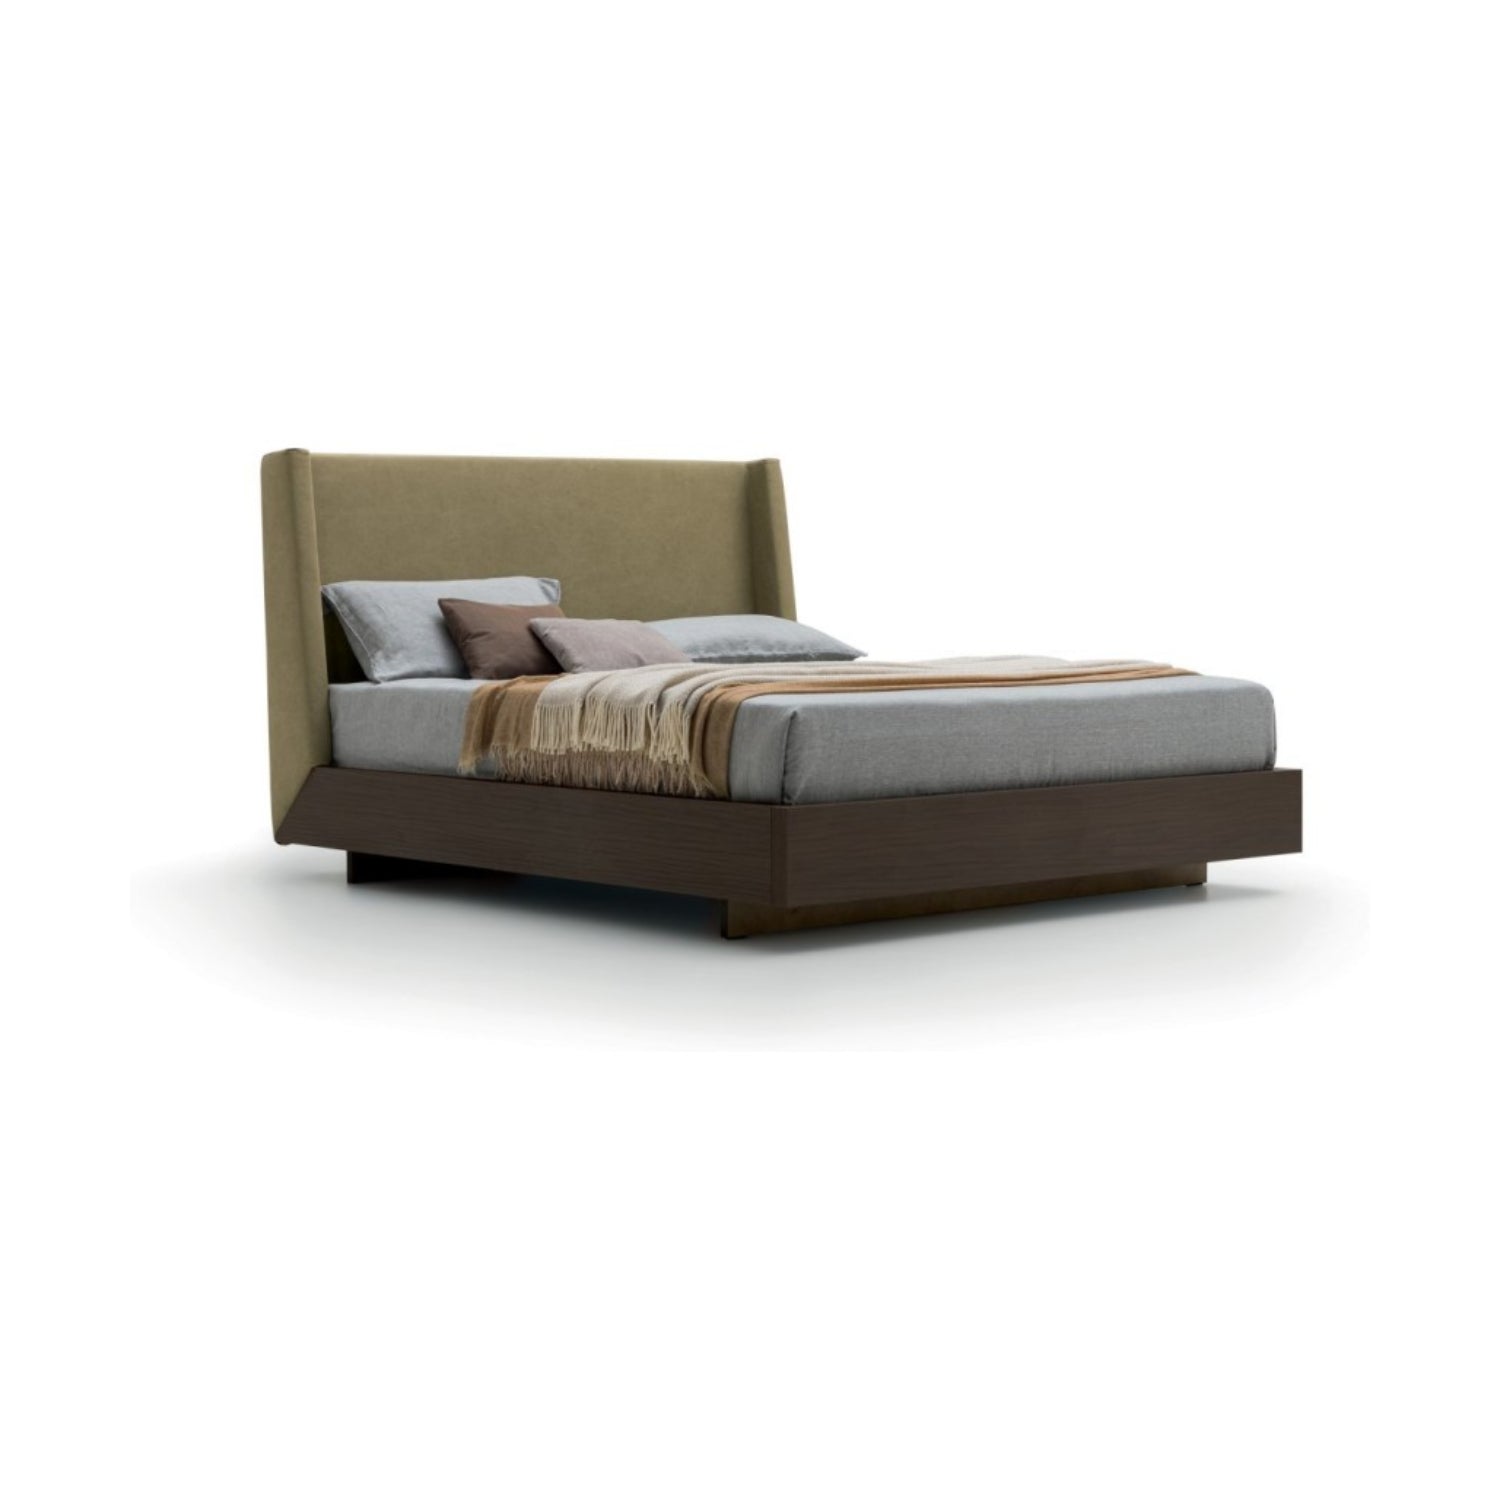 Libeccio upholstered Bed by Santa Lucia